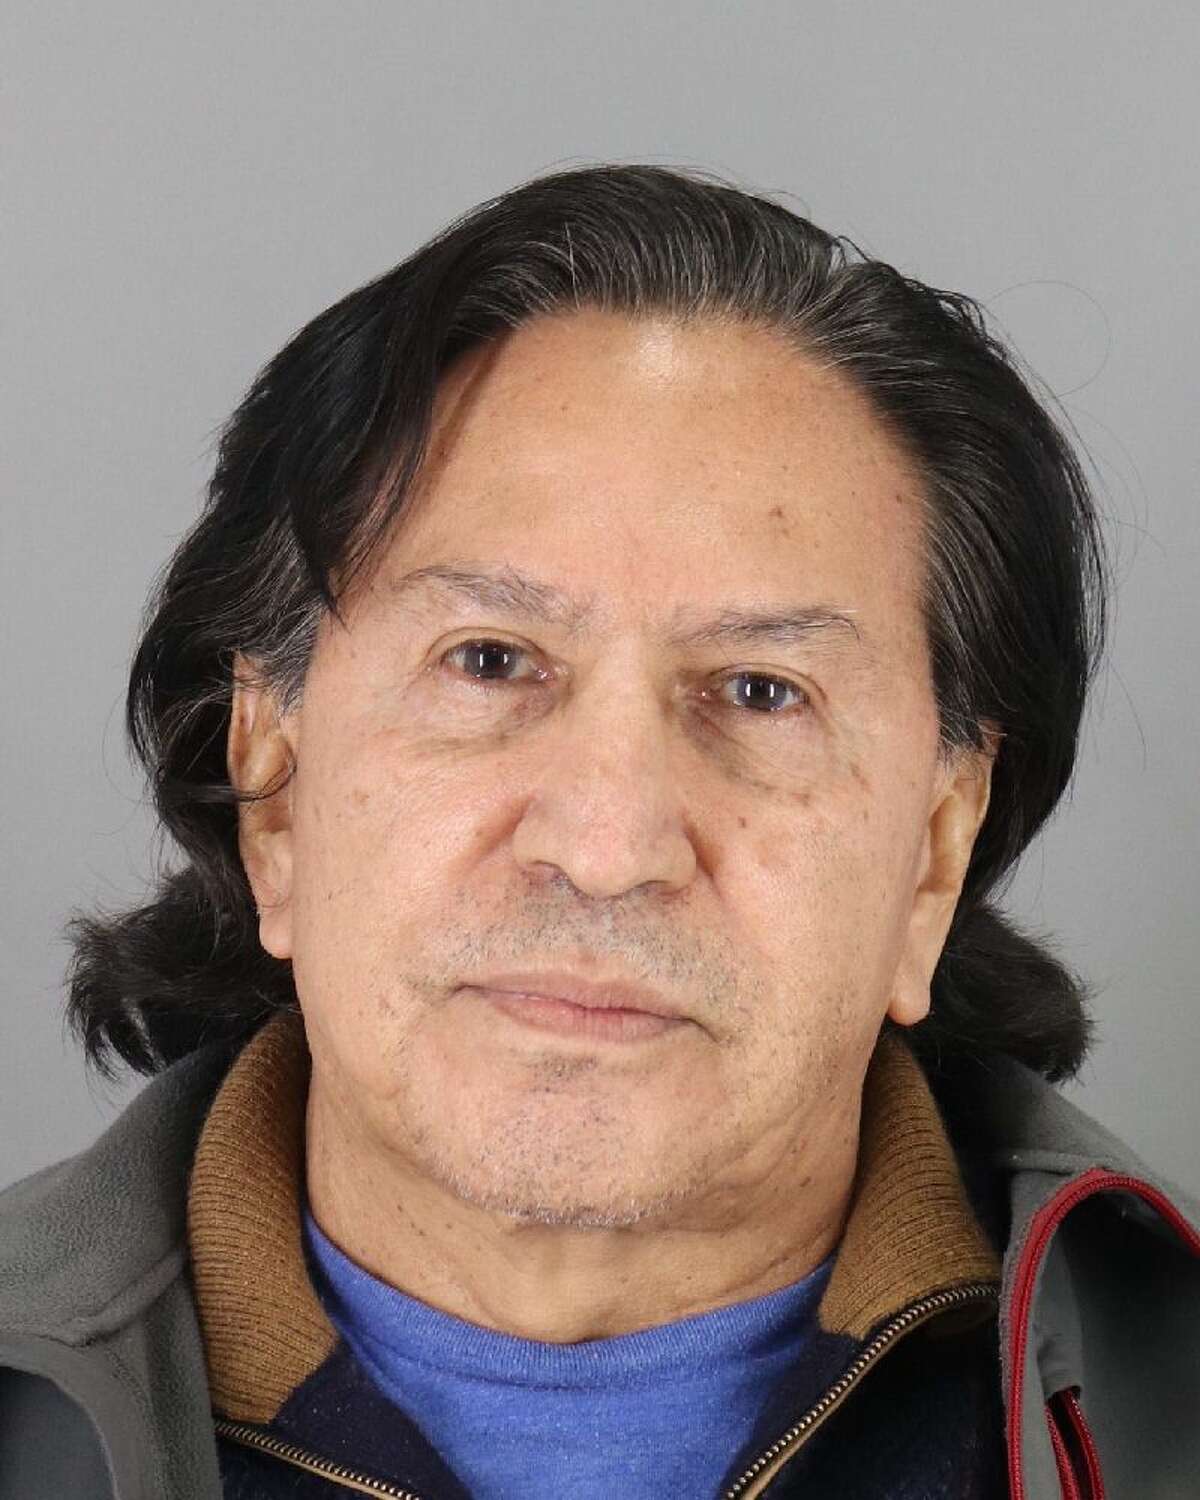 Alejandro Toledo Manrique, a former president of Peru, was arrested in San Mateo County on March 17, 2019. In February 2017, Peru’s government accused him of taking $20 million in bribes from a Brazilian construction company.